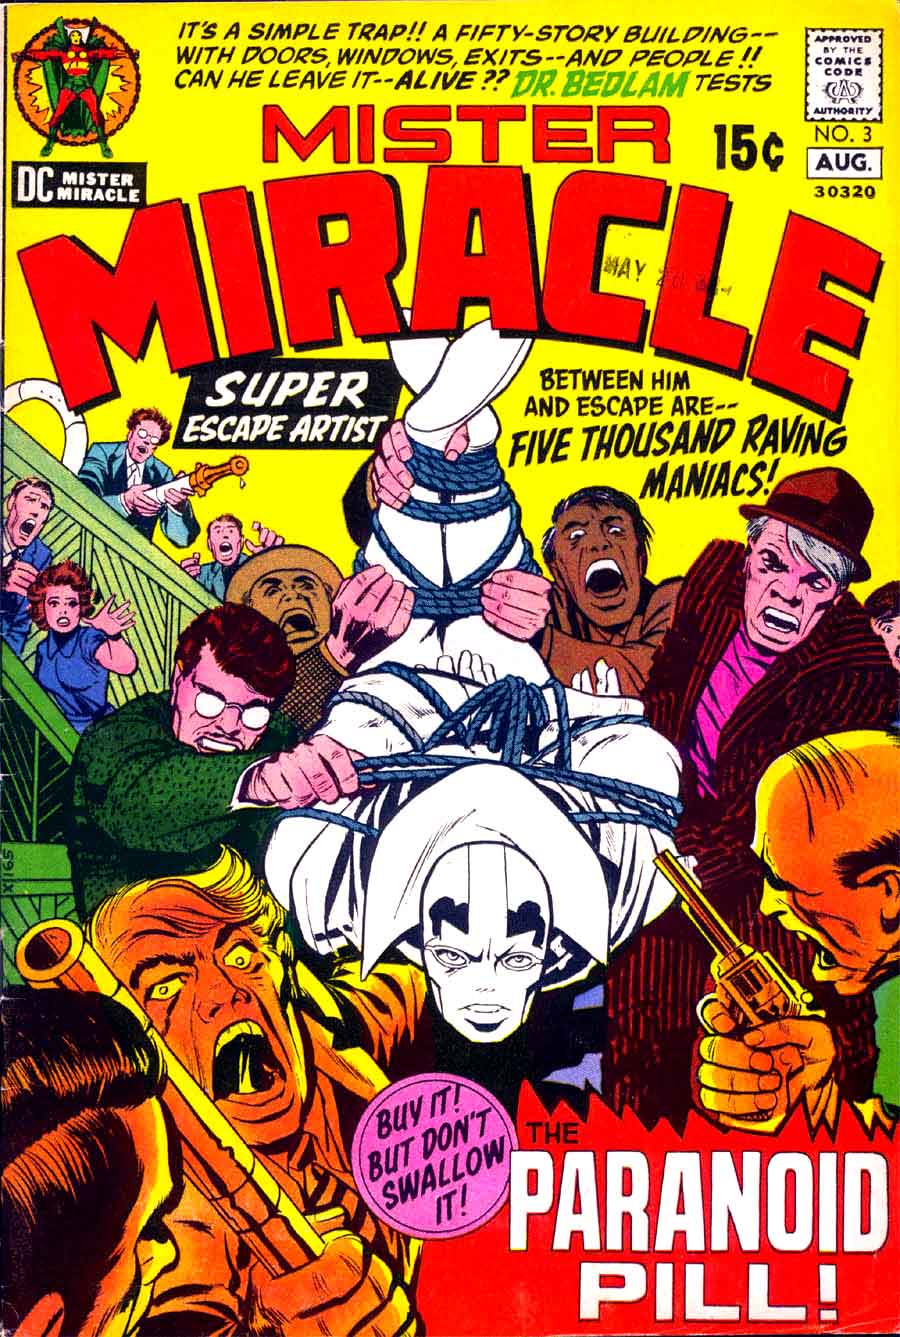 Mister Miracle v1 #3 dc 1970s bronze age comic book cover art by Jack Kirby